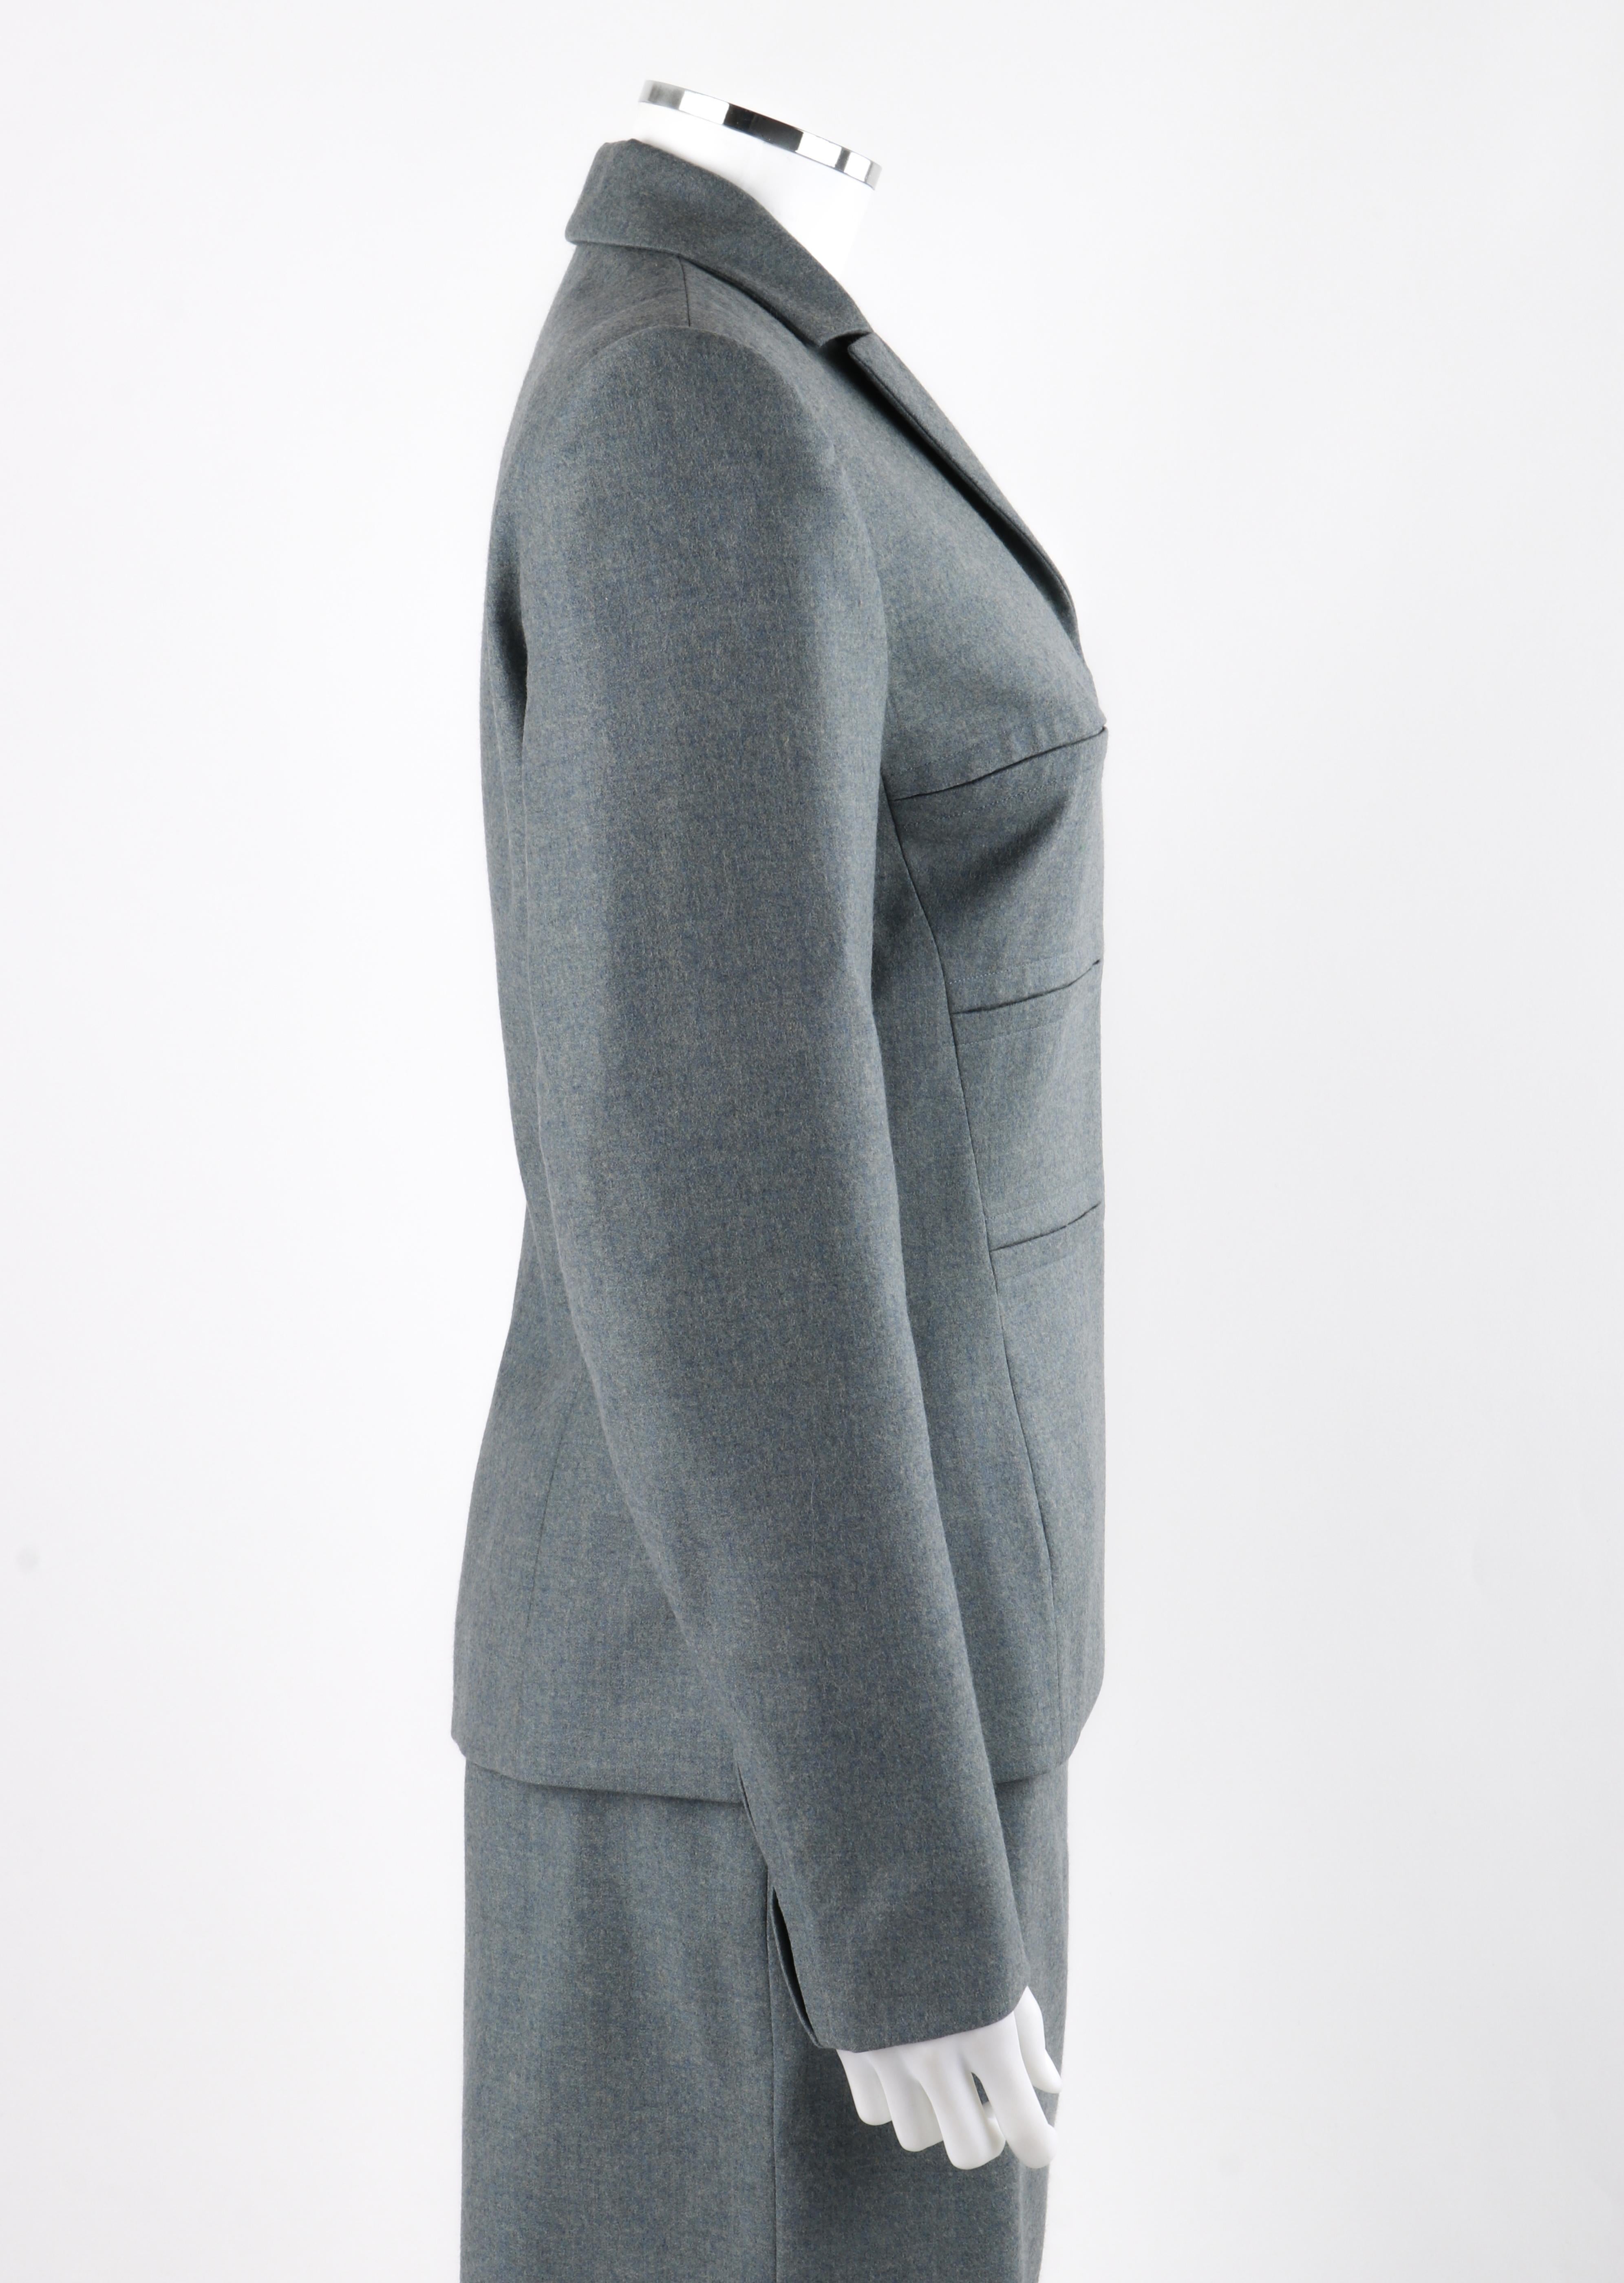 GIVENCHY Couture A/W 1998 ALEXANDER McQUEEN Blue Gray Tailored Blazer Skirt Suit In Good Condition For Sale In Thiensville, WI